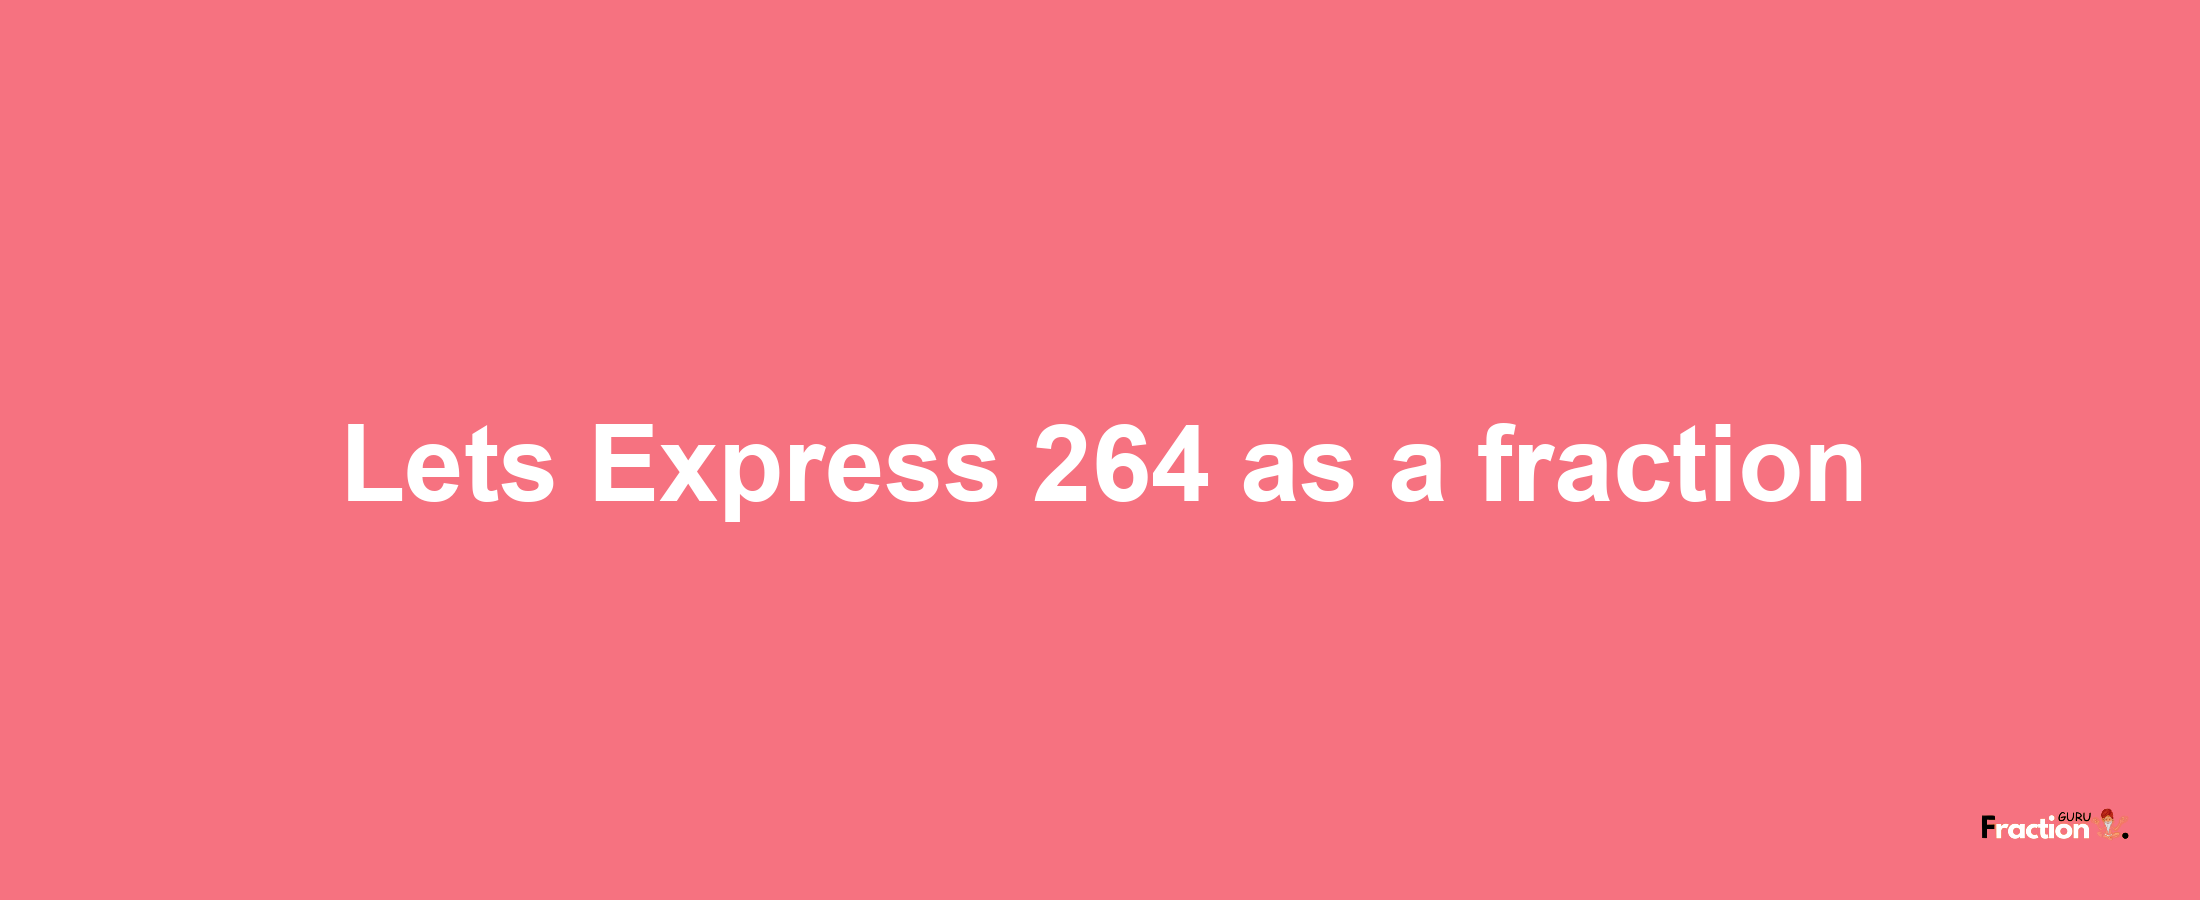 Lets Express 264 as afraction